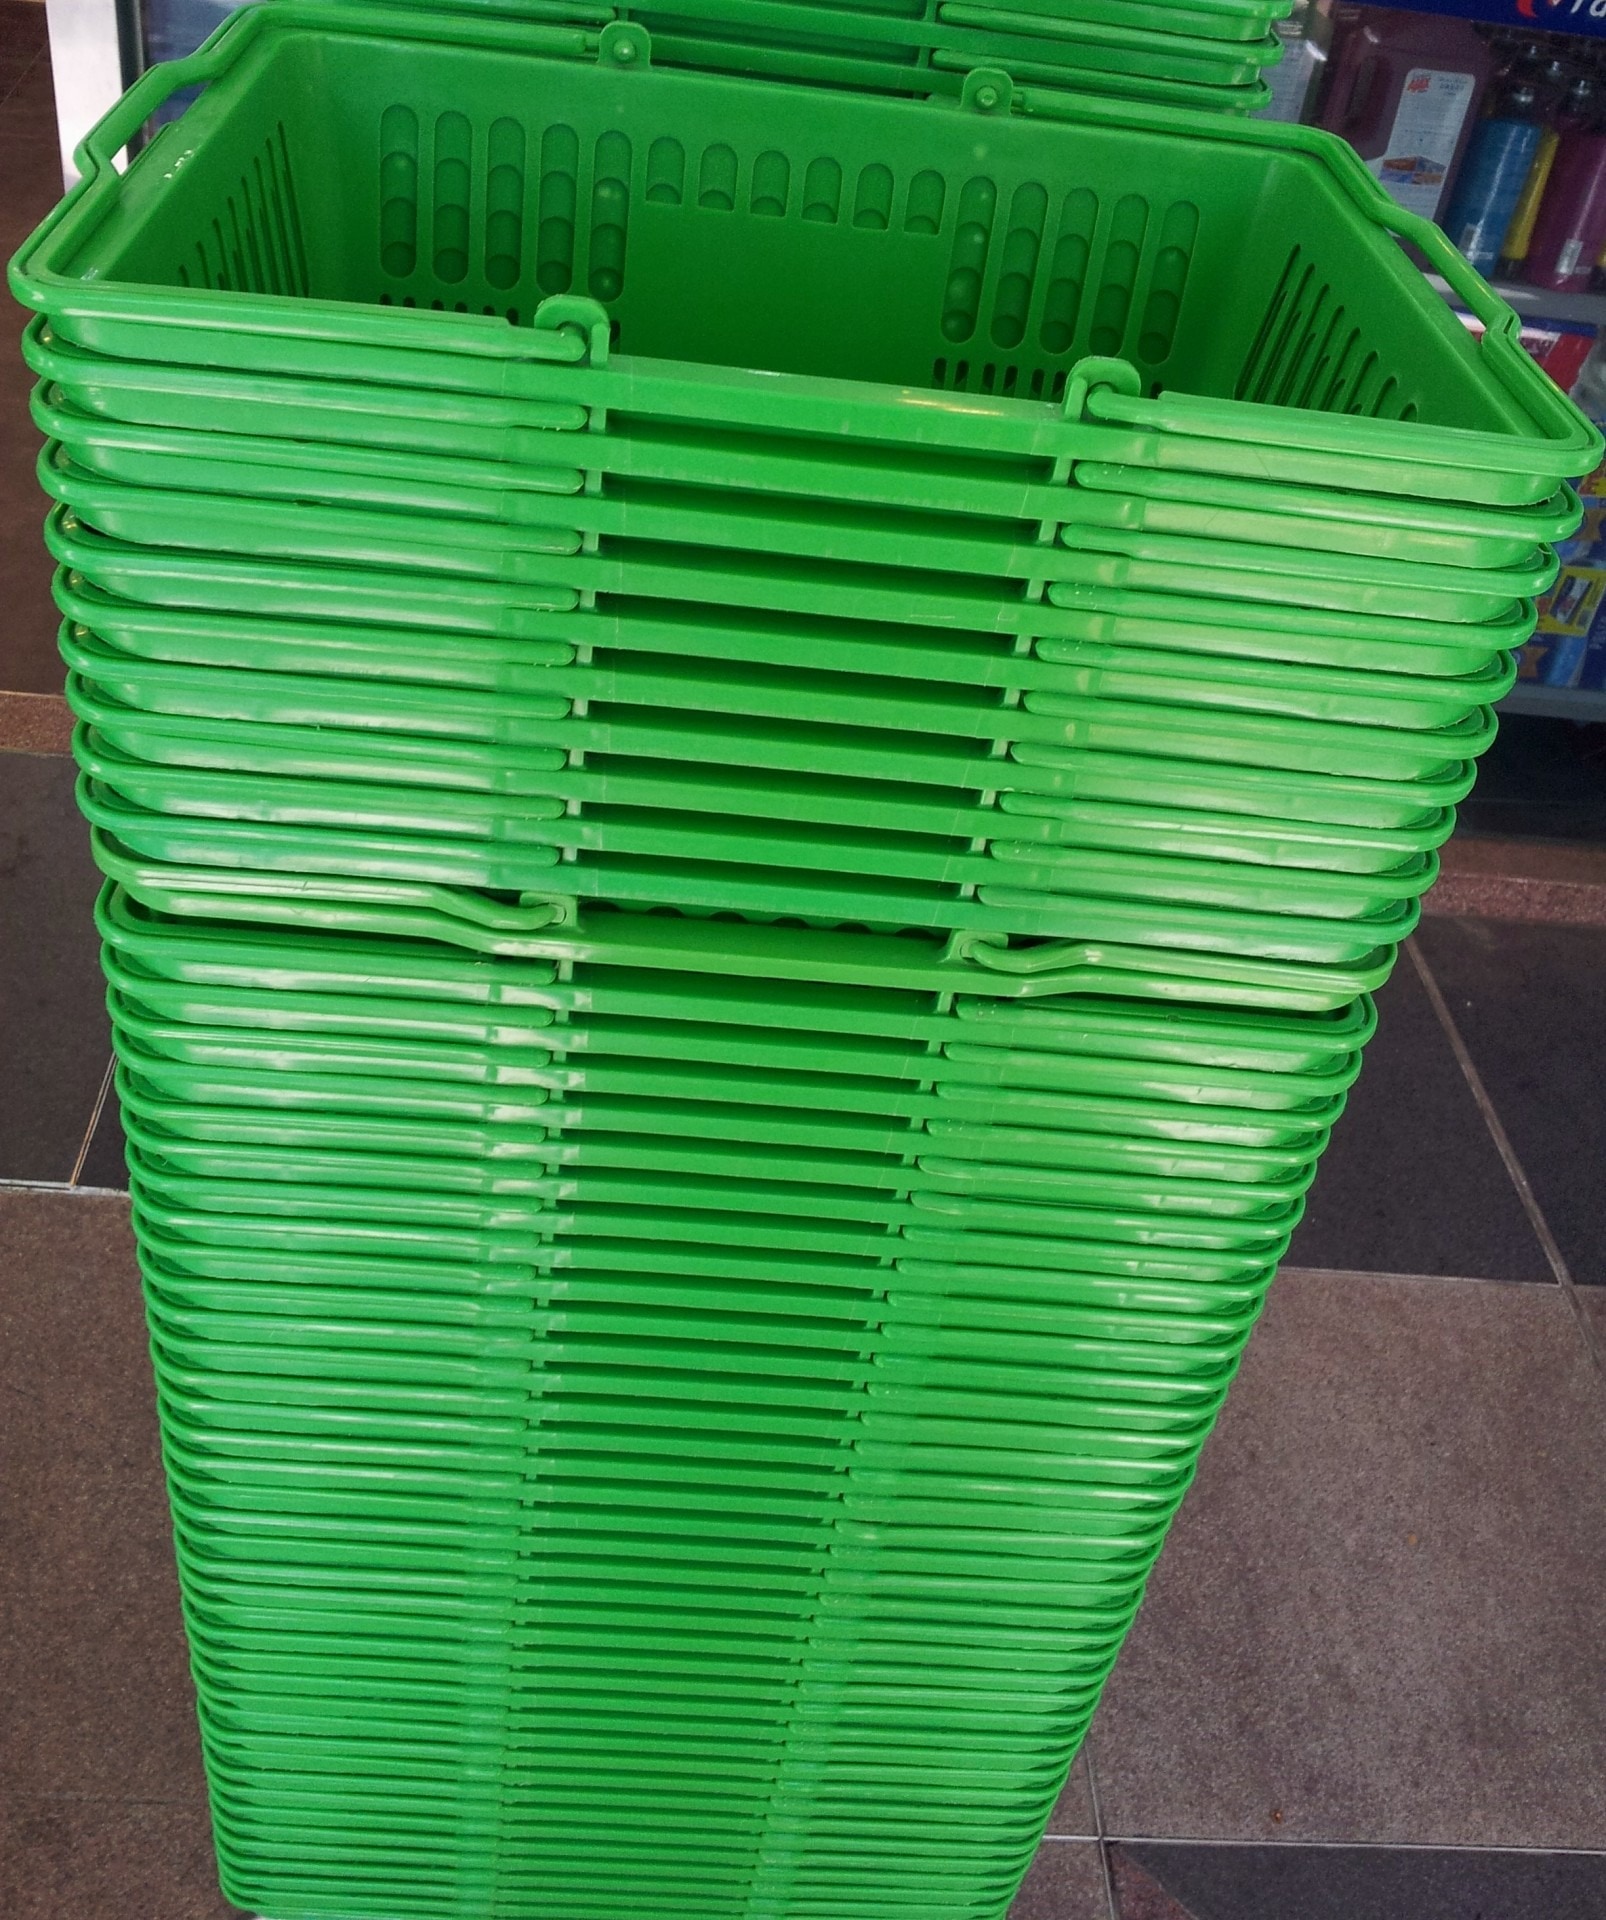 green stackable plastic shopping basket lot